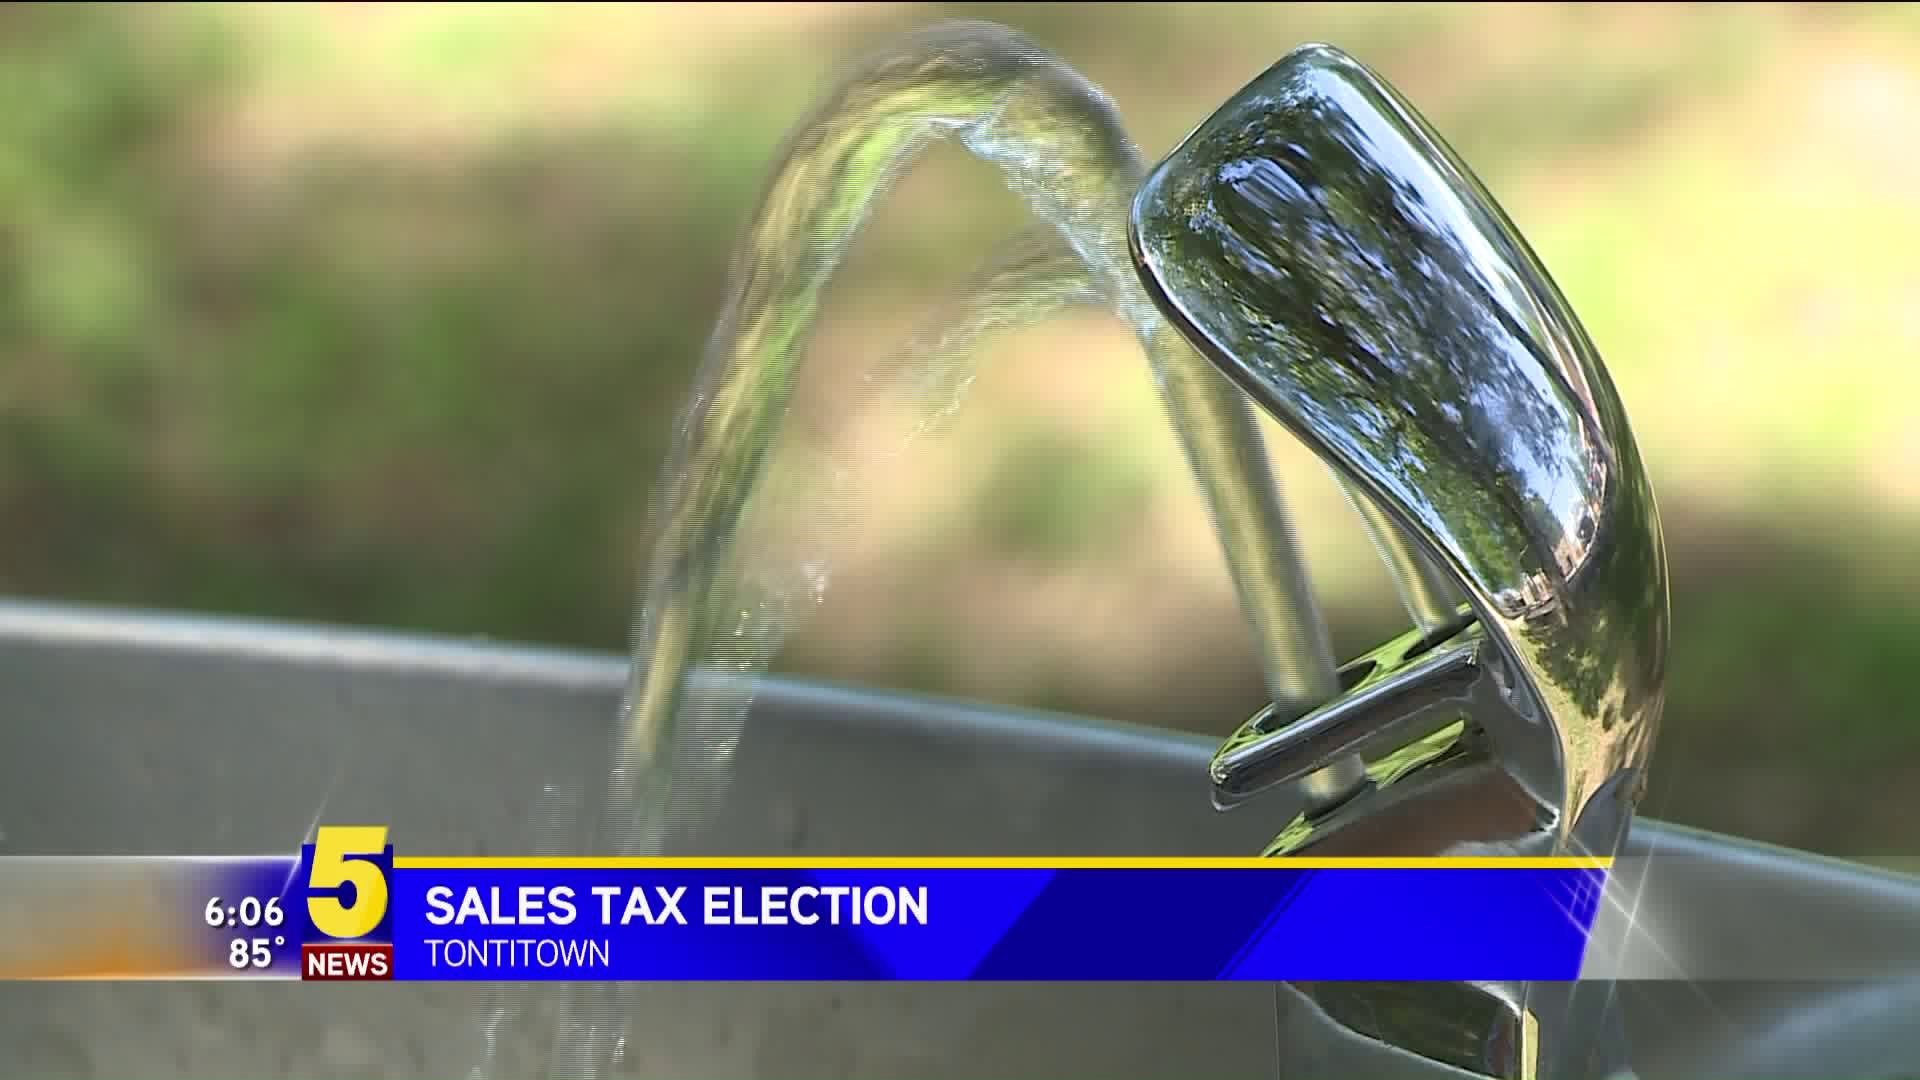 Sales Tax Election